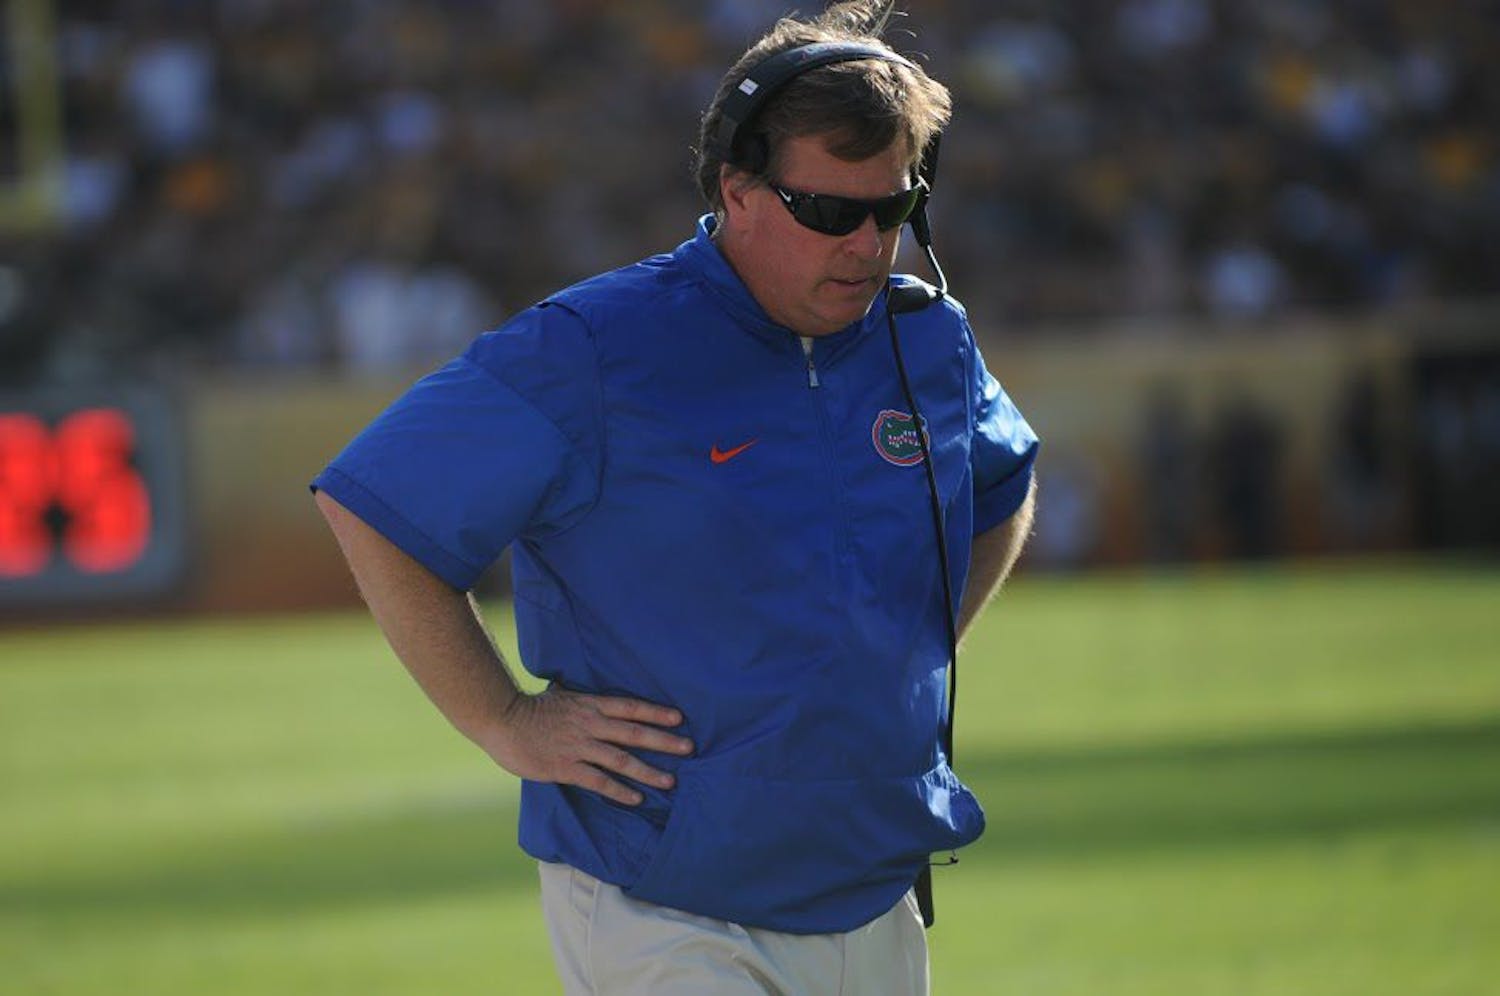 UF coach Jim McElwain looks down in disapproval during Florida's 30-3 win over Iowa in the Outback Bowl on Jan. 2, 2017, at Raymond James Stadium in Tampa.&nbsp;